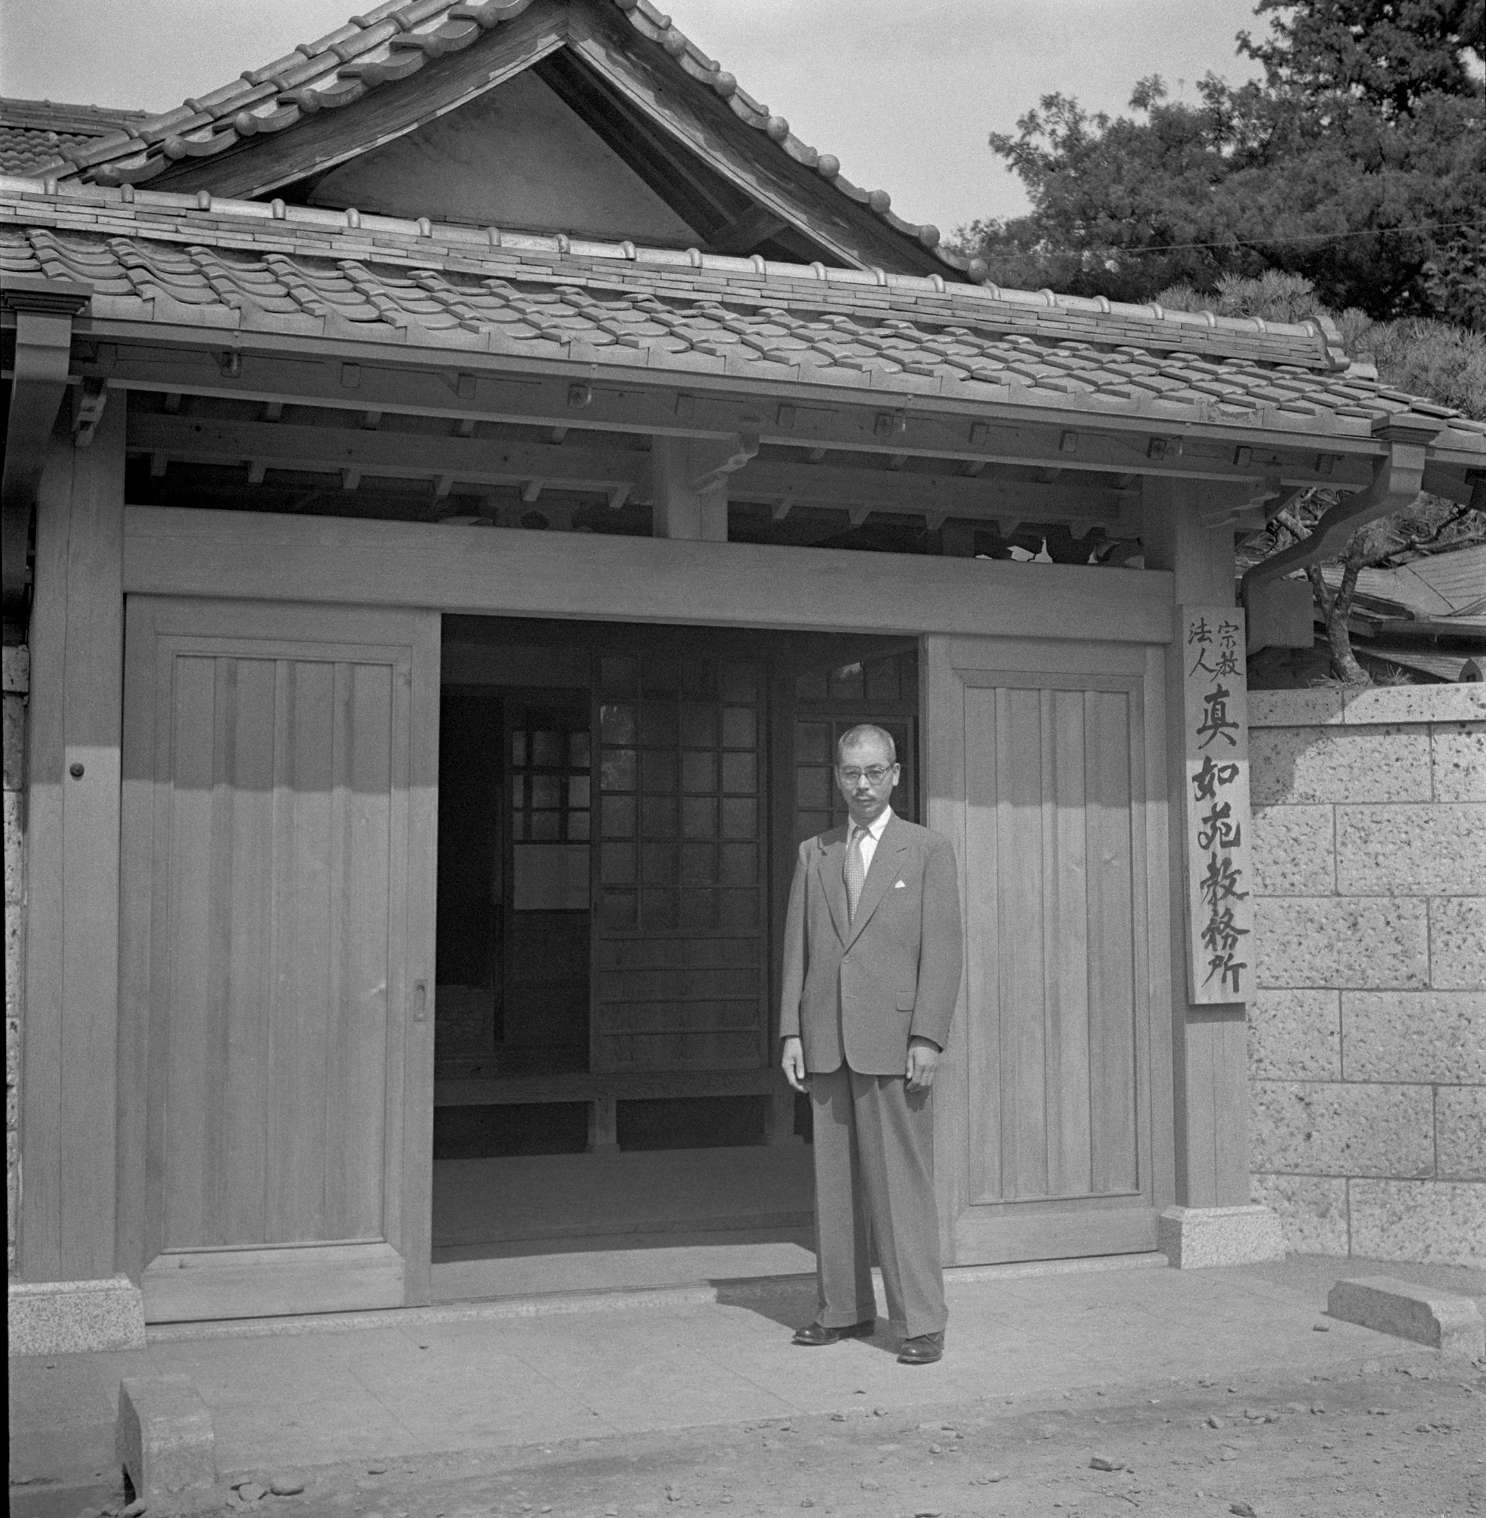 Shinjo, in a suit and glasses, stands at the open door to Shinchoji temple; a plaque with Japanese calligraphy hangs to the right of the door, beneath a tiled roof.